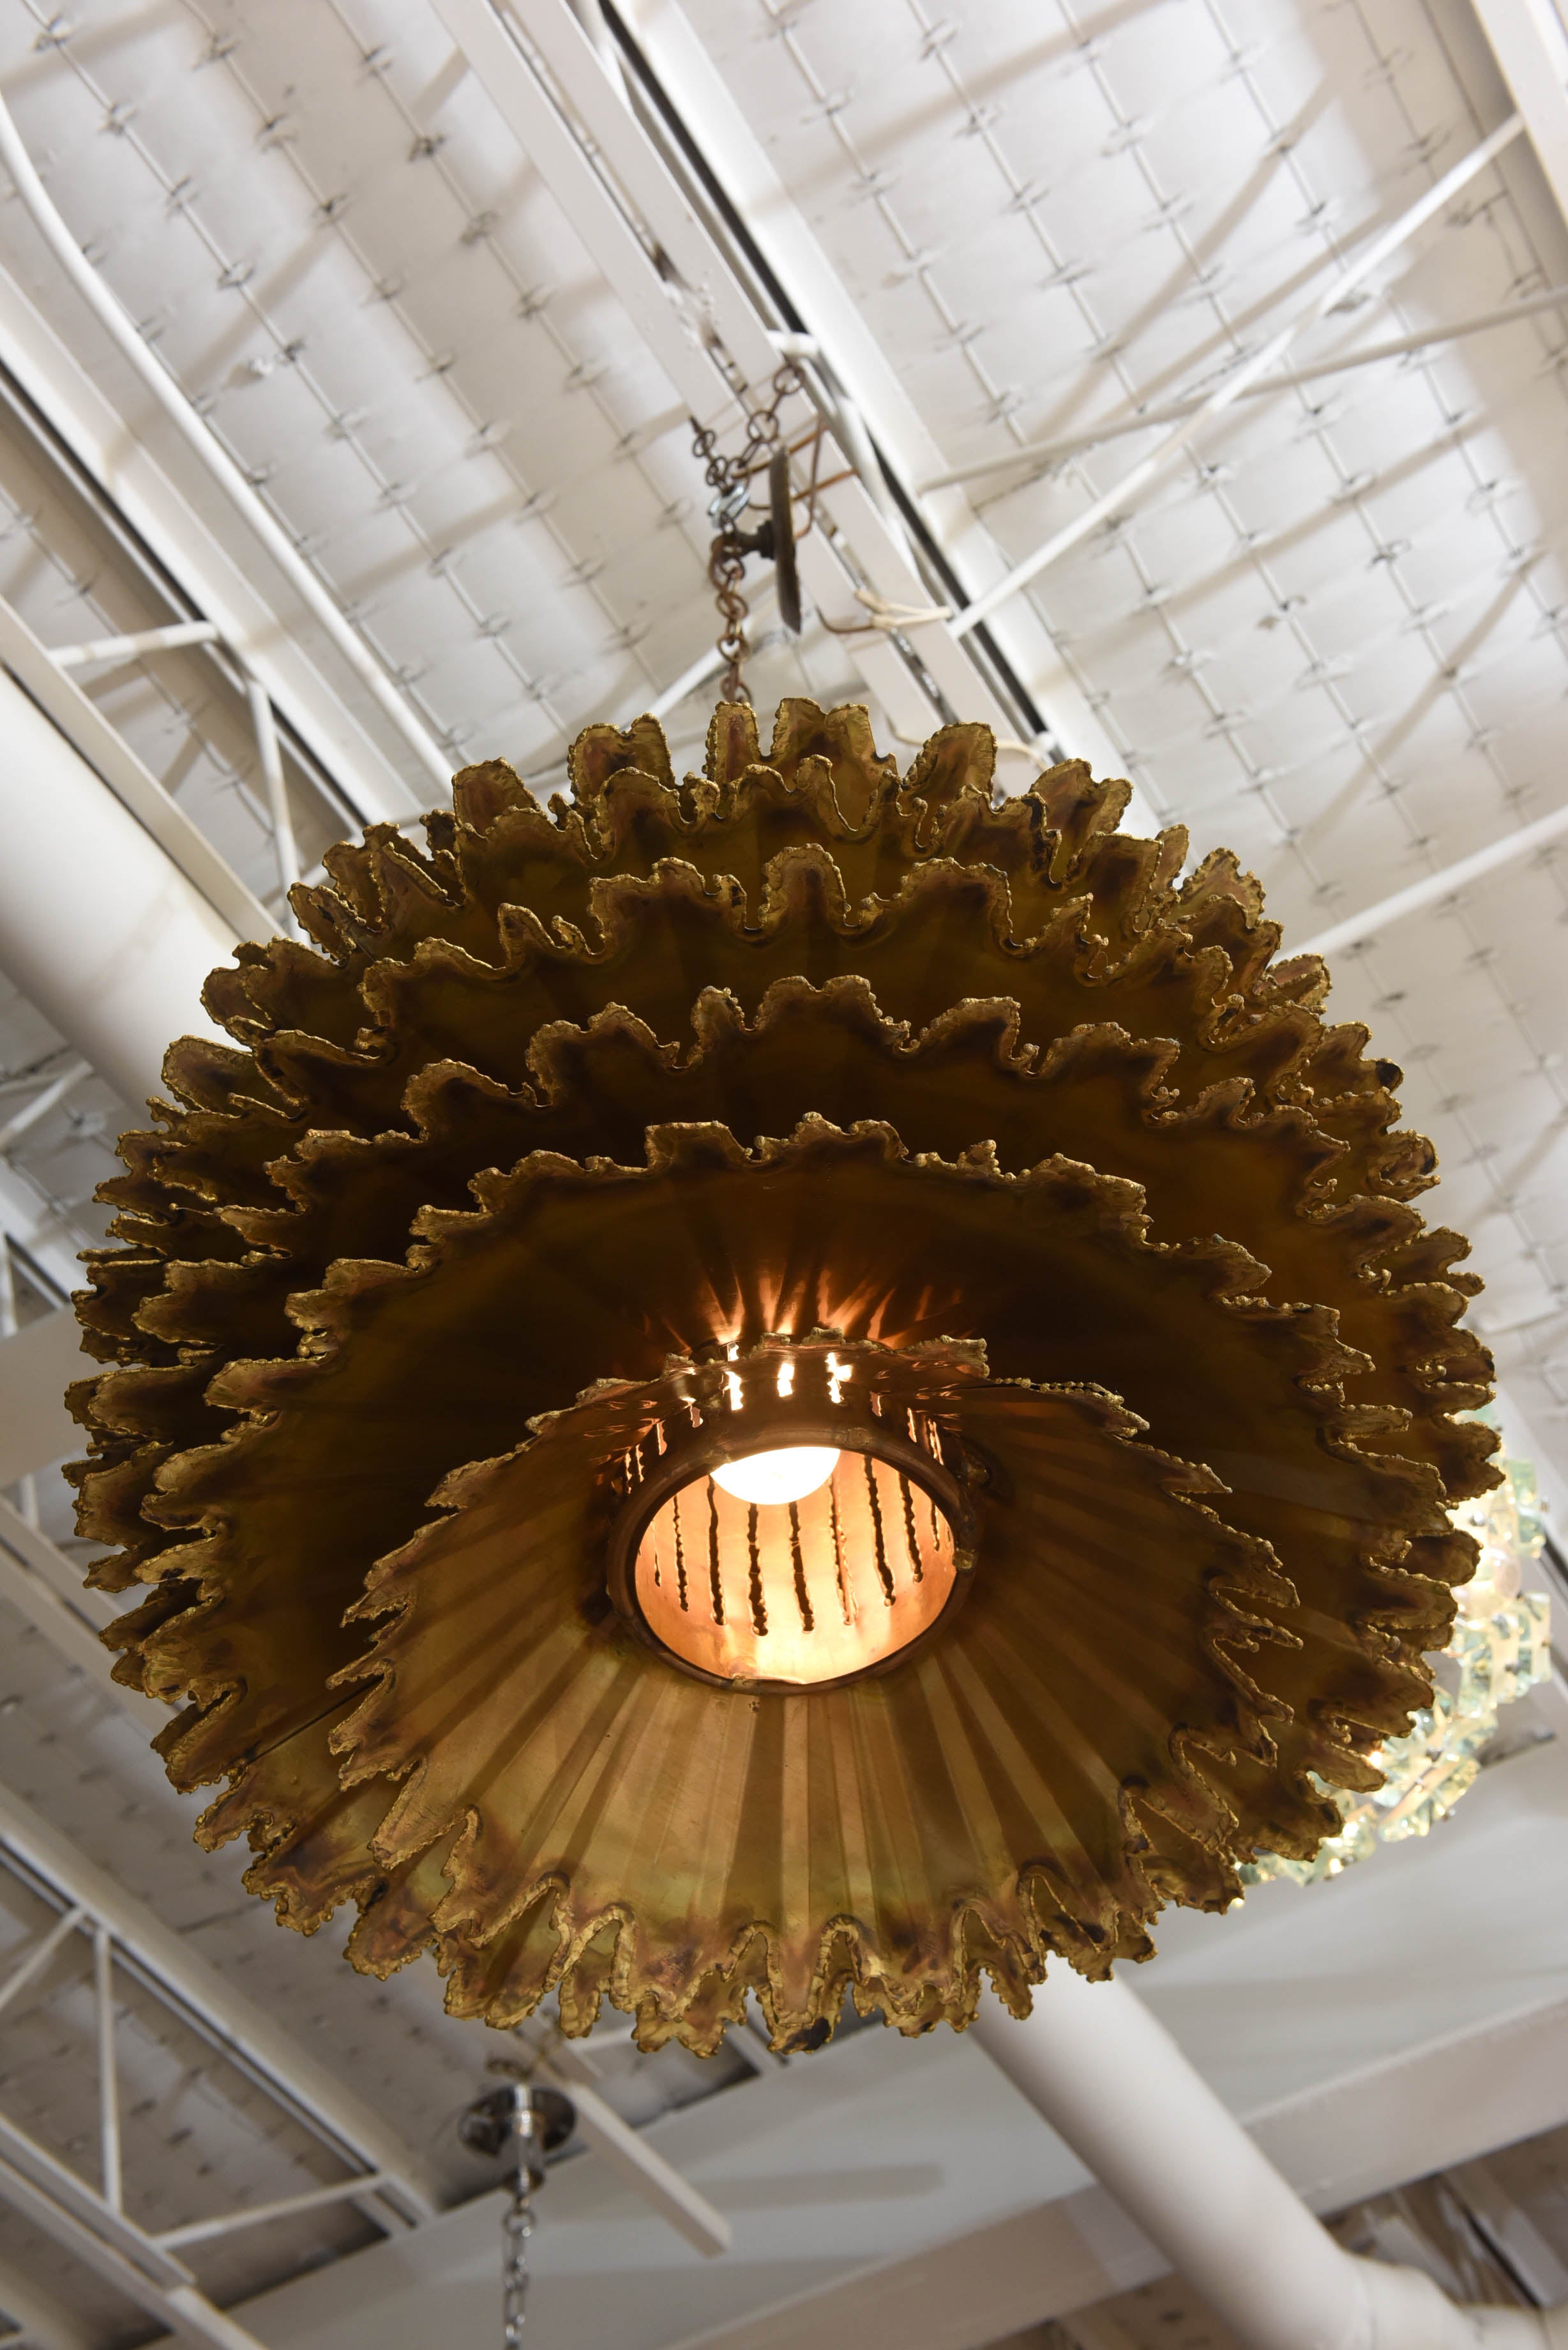 Hand-Crafted Large Brutalist Orb Chandelier by T.A. Greene for Feldman Lighting